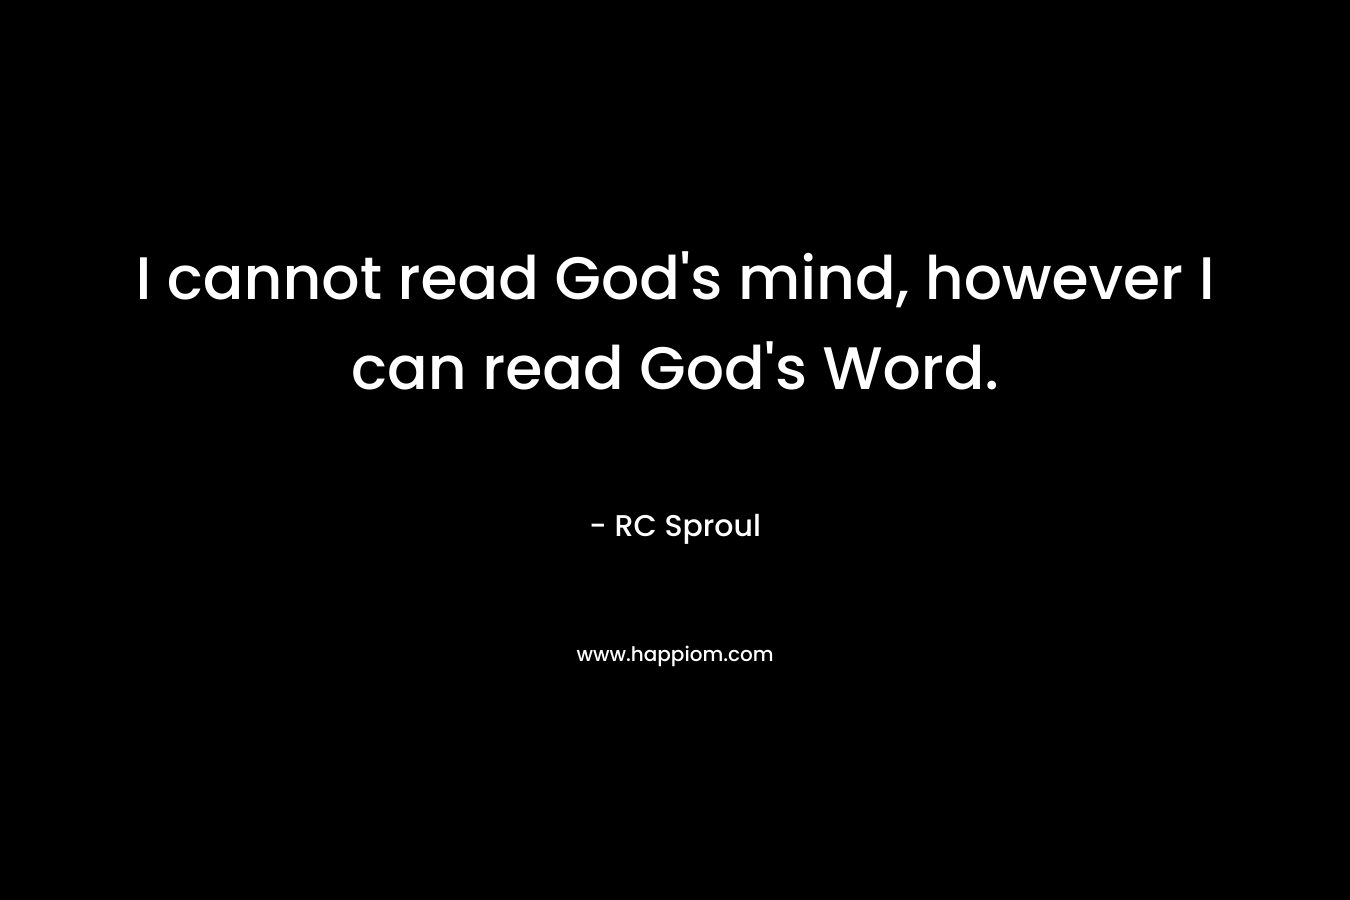 I cannot read God's mind, however I can read God's Word.